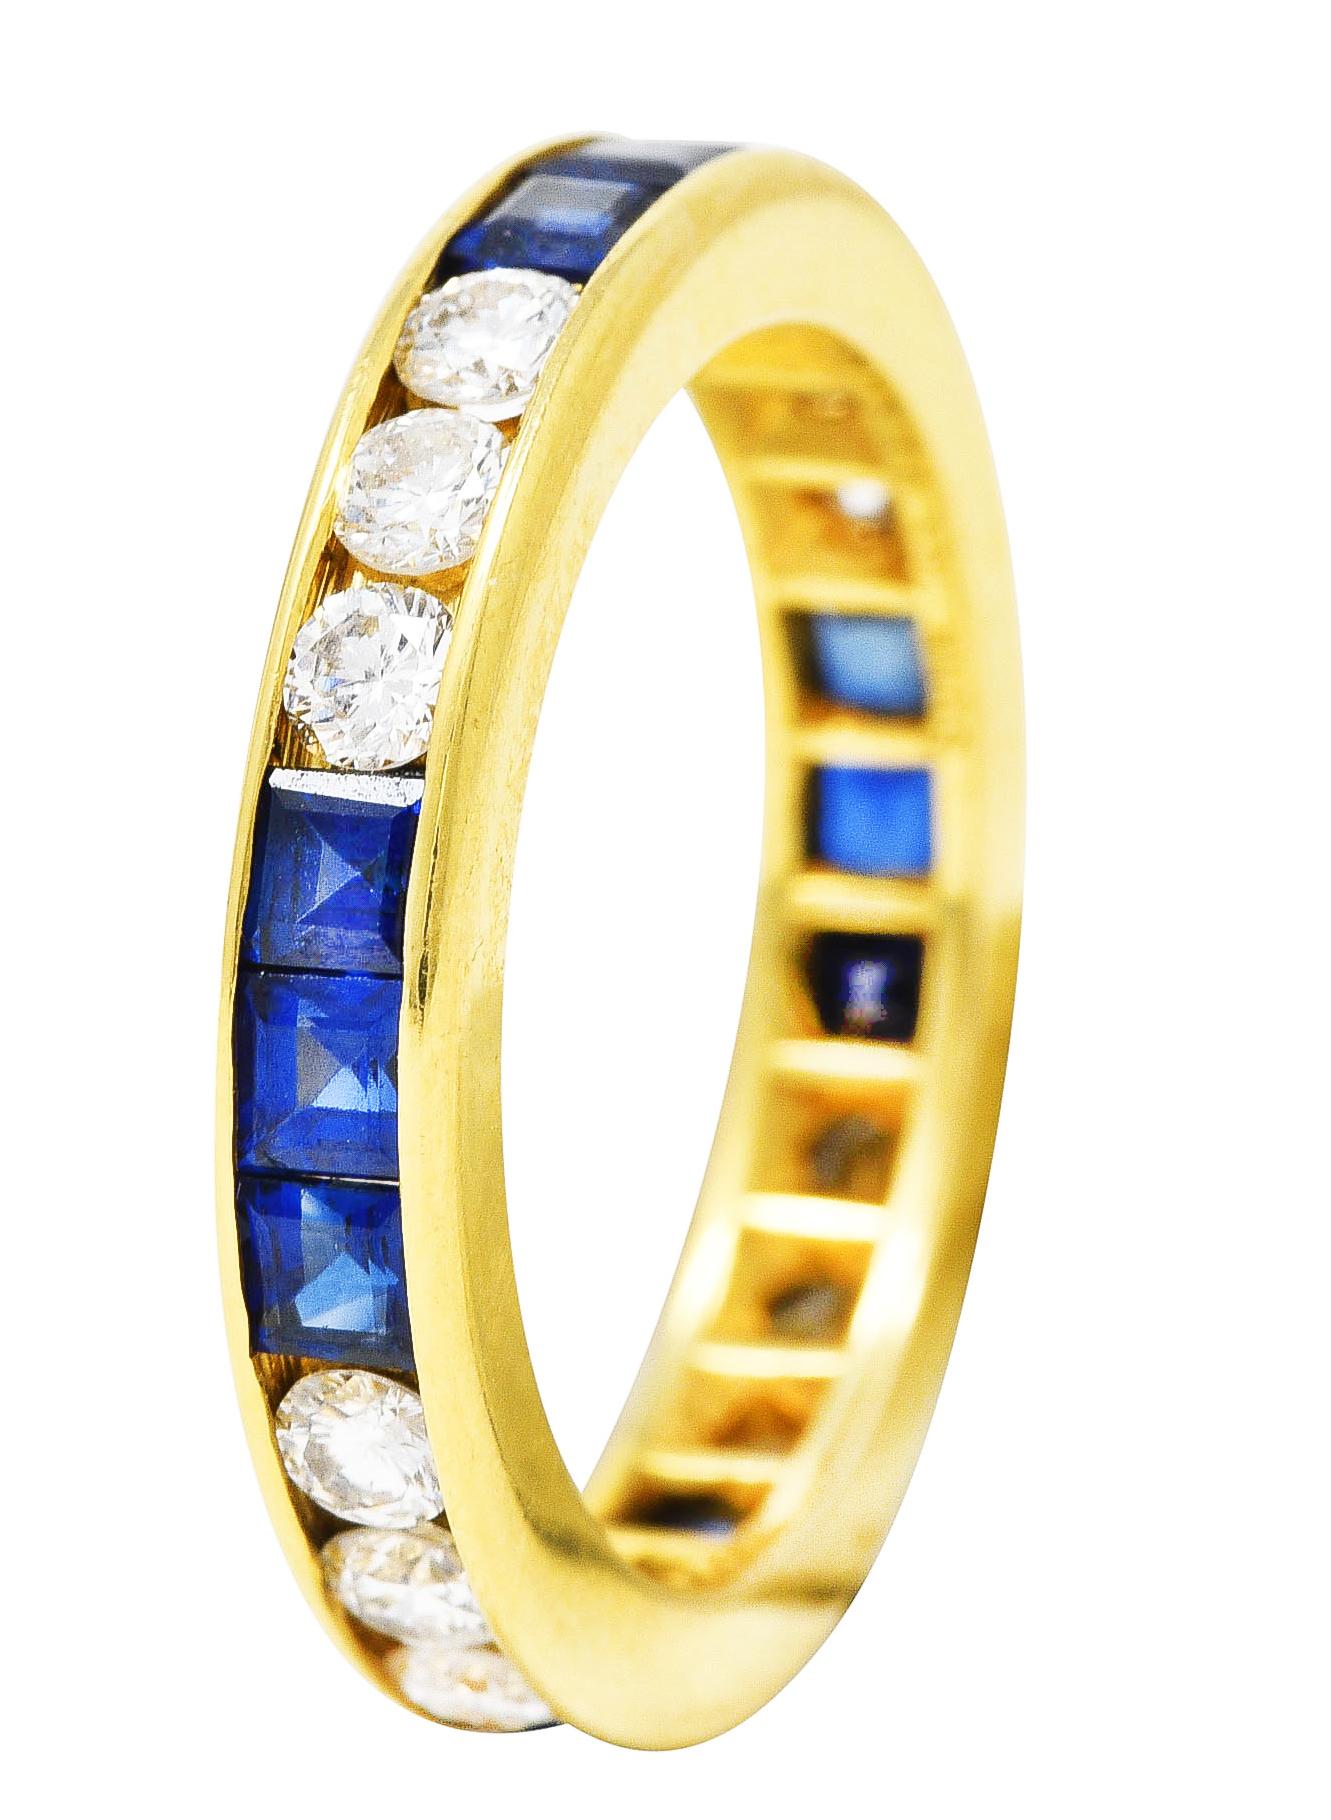 Band ring features round brilliant cut diamonds and square cut sapphires channel set fully around. Diamonds weigh approximately 1.20 carats total - G/H in color with VS2 clarity. Sapphires weigh approximately 1.80 carats total - transparent medium